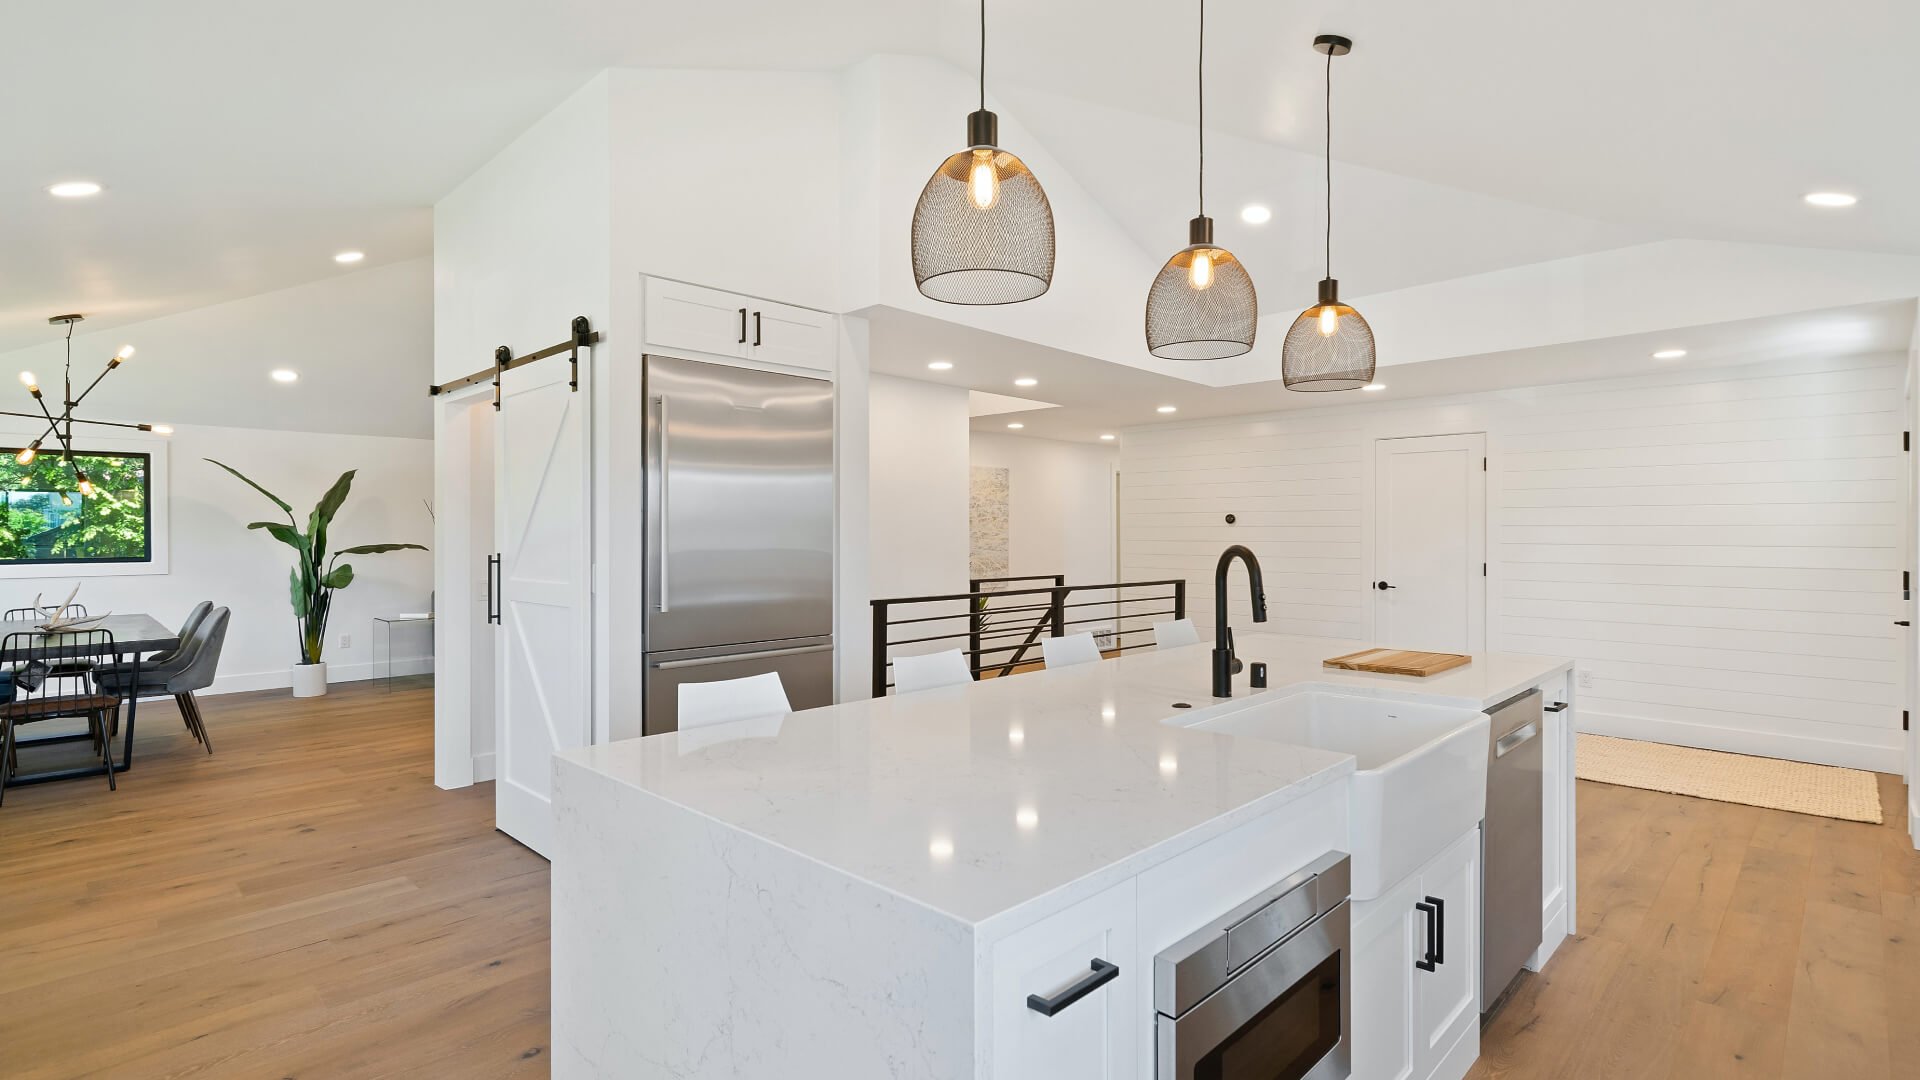 A modern kitchen with white cabinets and a large island, perfect for homeowners looking to hire residential electricians in the sunshine coast area.